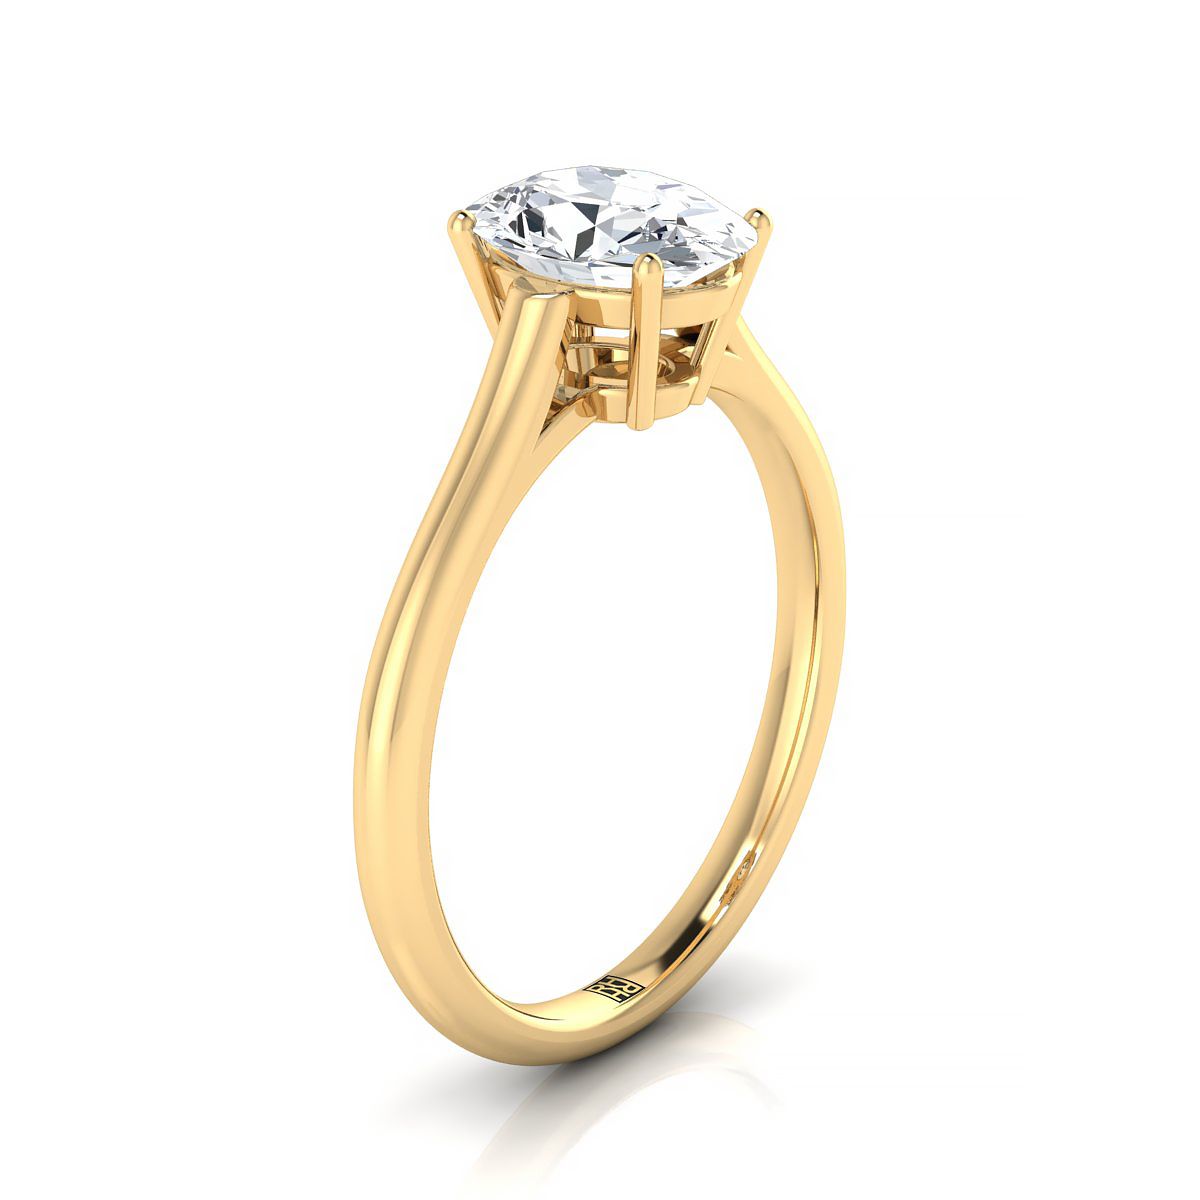 14K Yellow Gold Oval  Cathedral Style Comfort Fit Solitaire Engagement Ring